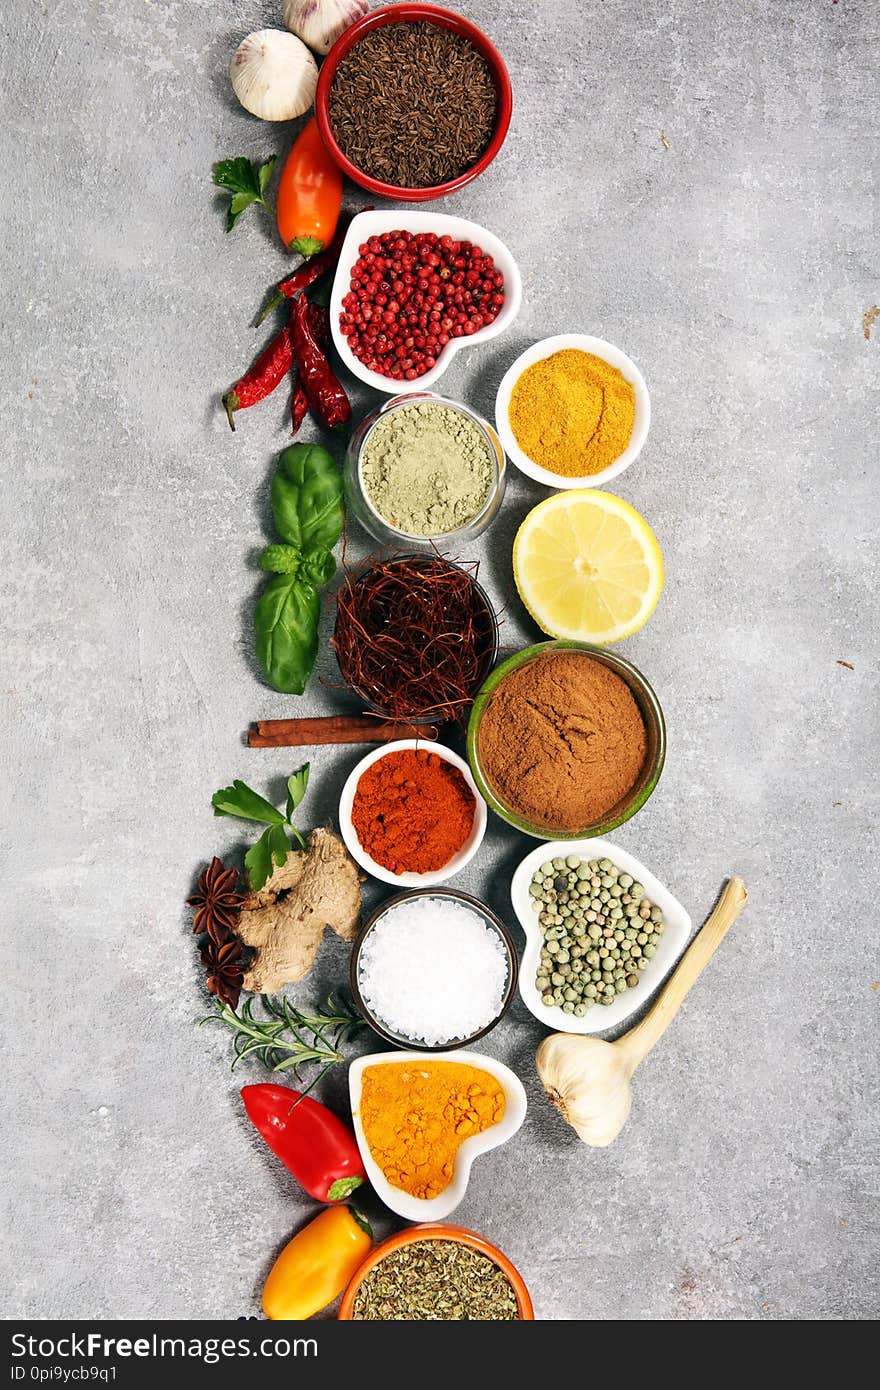 Spices and herbs on table. Food and cuisine ingredients for cooking